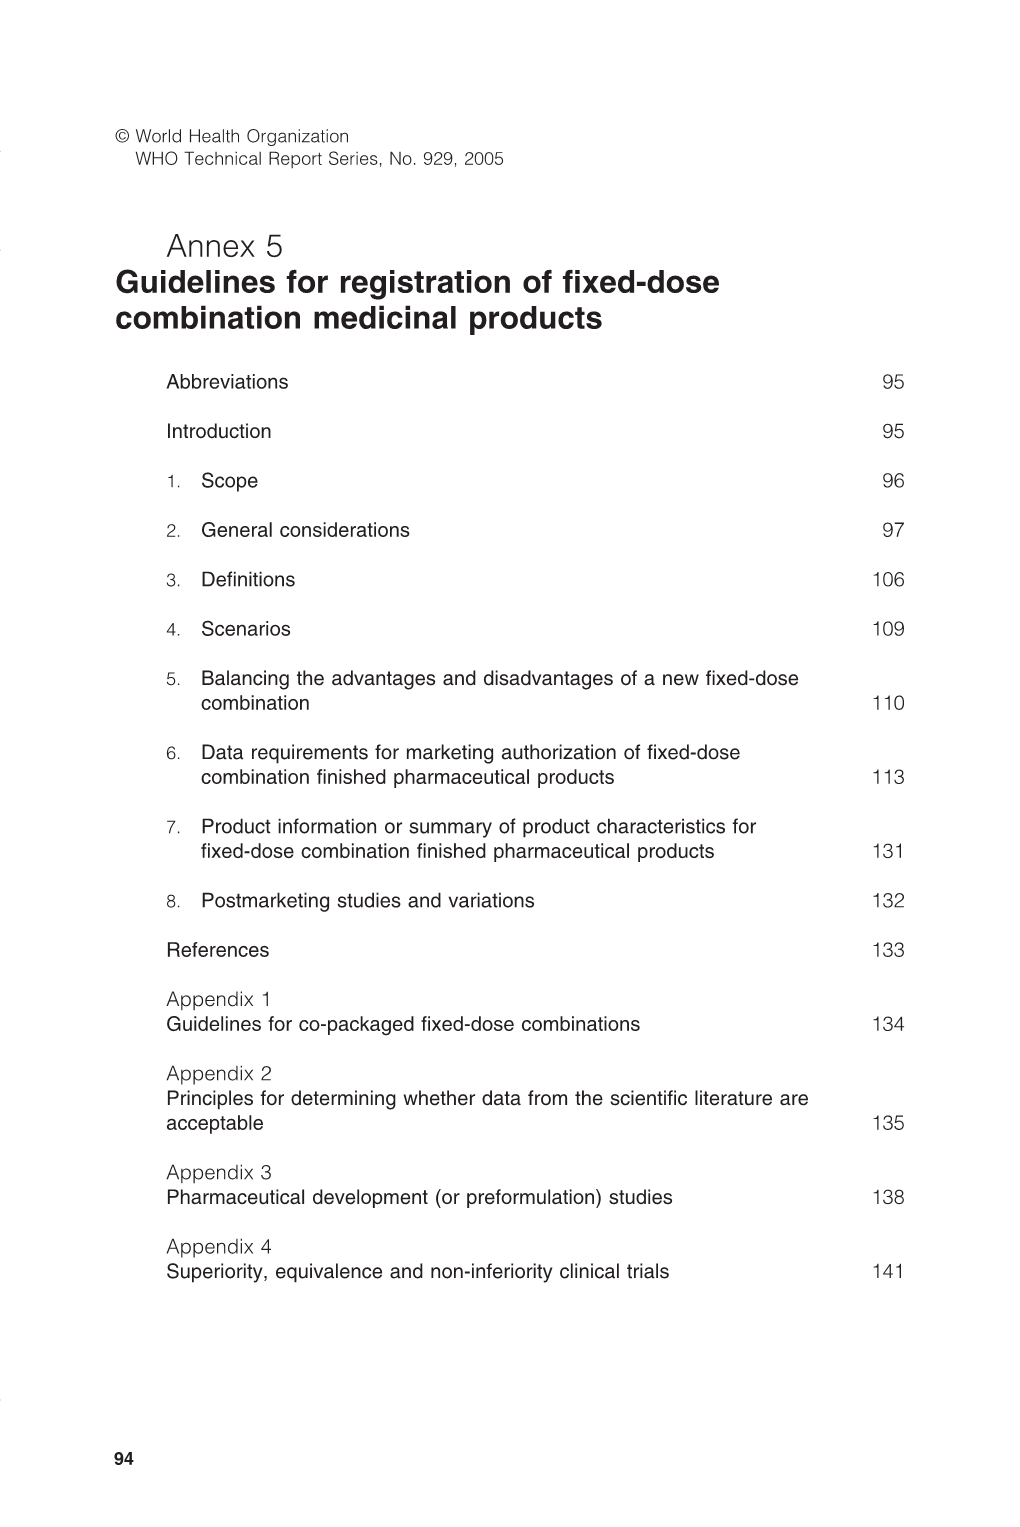 Annex 5 Guidelines for Registration of Fixed-Dose Combination Medicinal